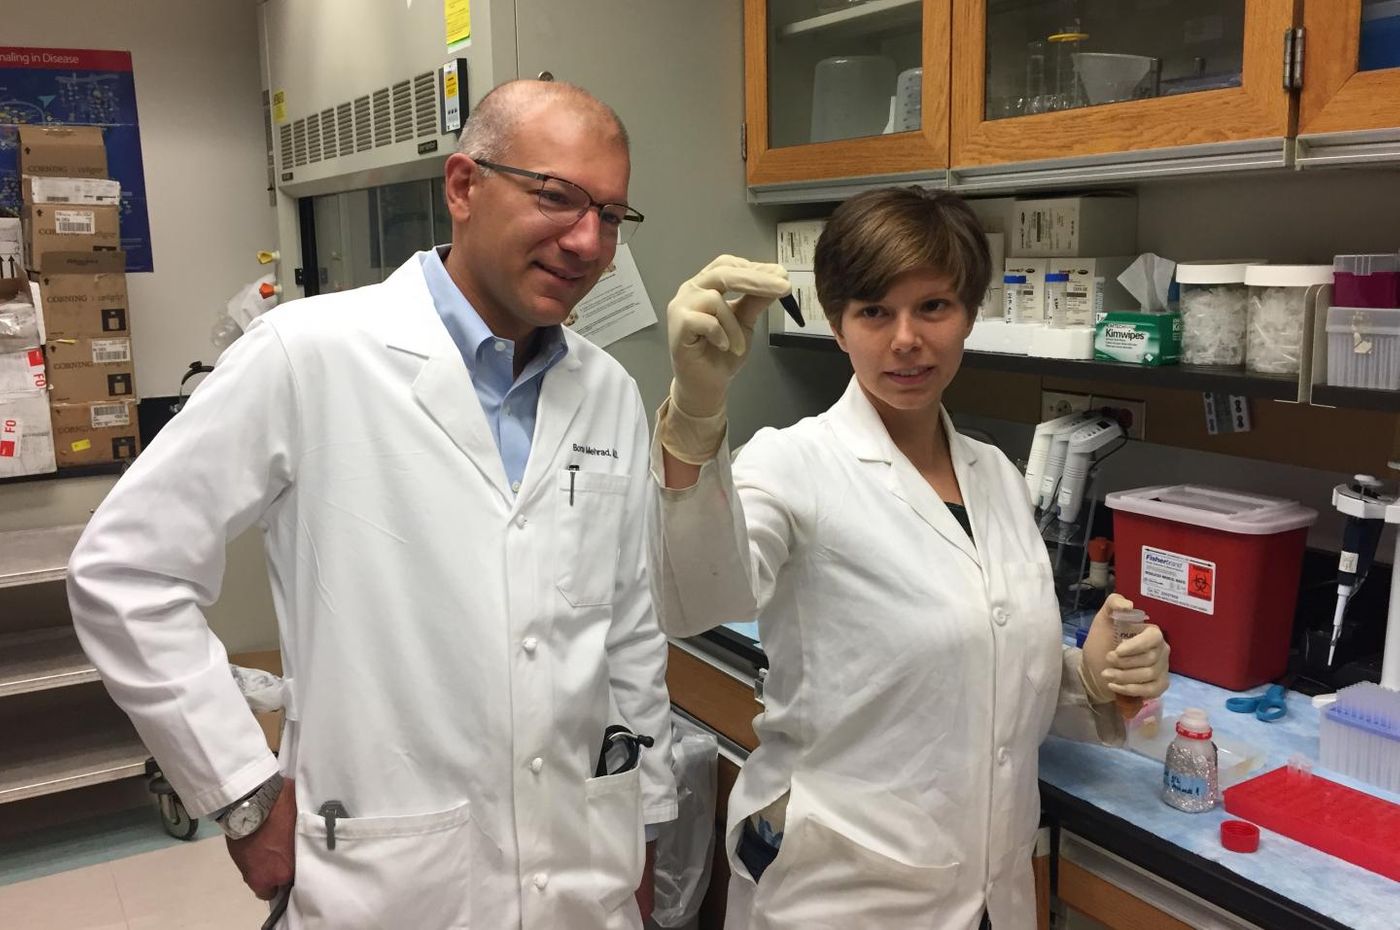 Borna Mehrad, MBBS (left), and Kathryn Michels, both of the University of Virginia School of Medicine, have identified a hormone that helps the body fight off the spread of bacterial pneumonia. The discovery may offer a simple way to help vulnerable patients. Credit: Josh Barney | UVA Health System